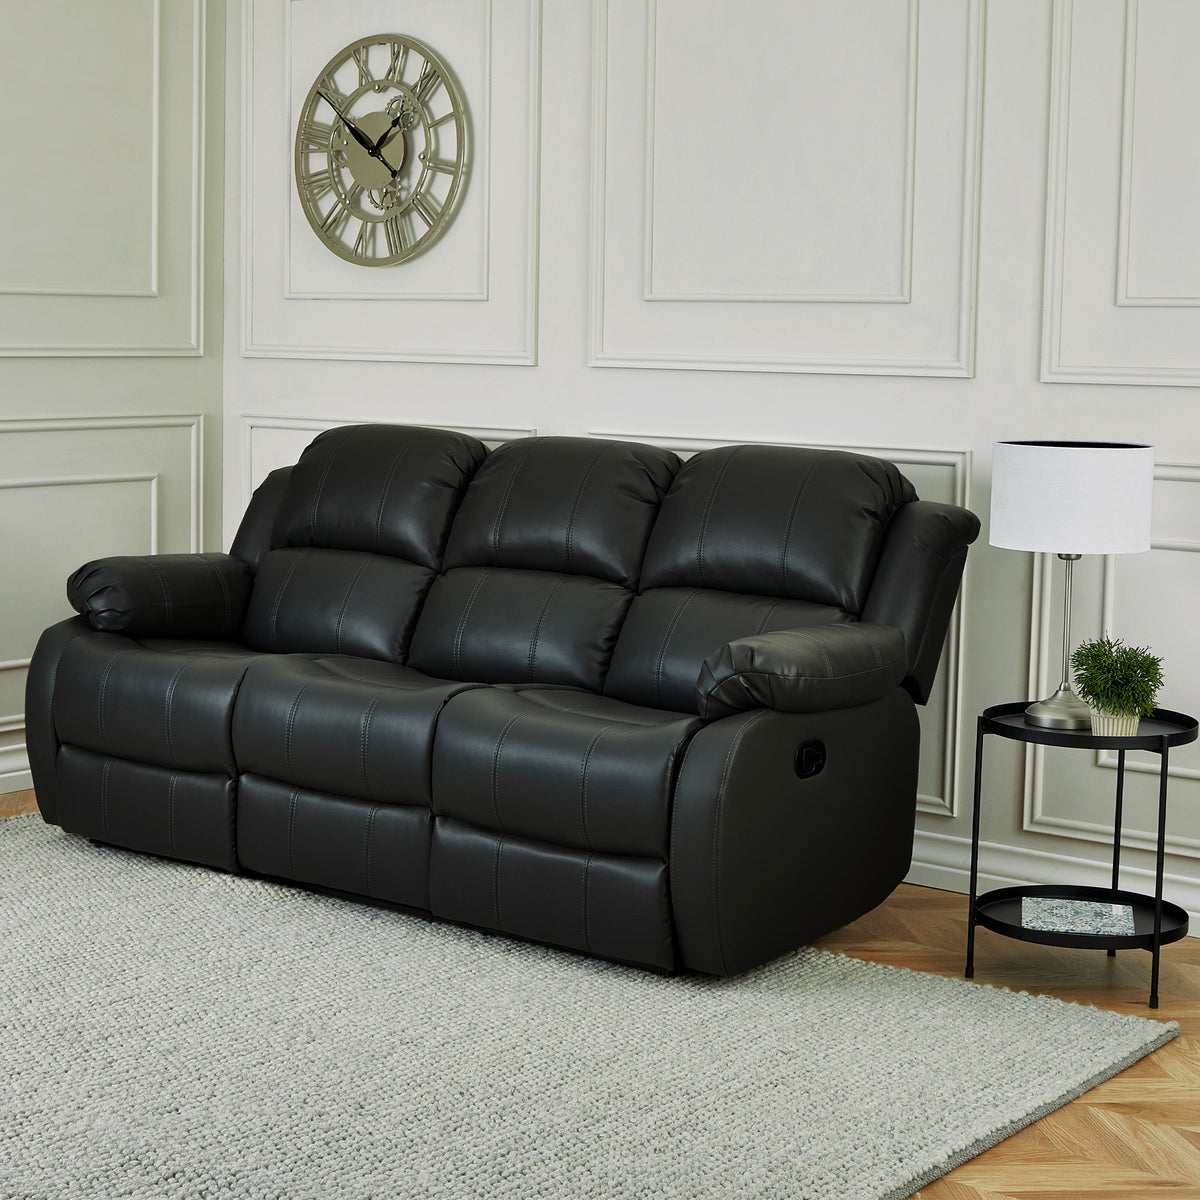 Anton Black Leather Reclining 3 Seater Sofa for living room